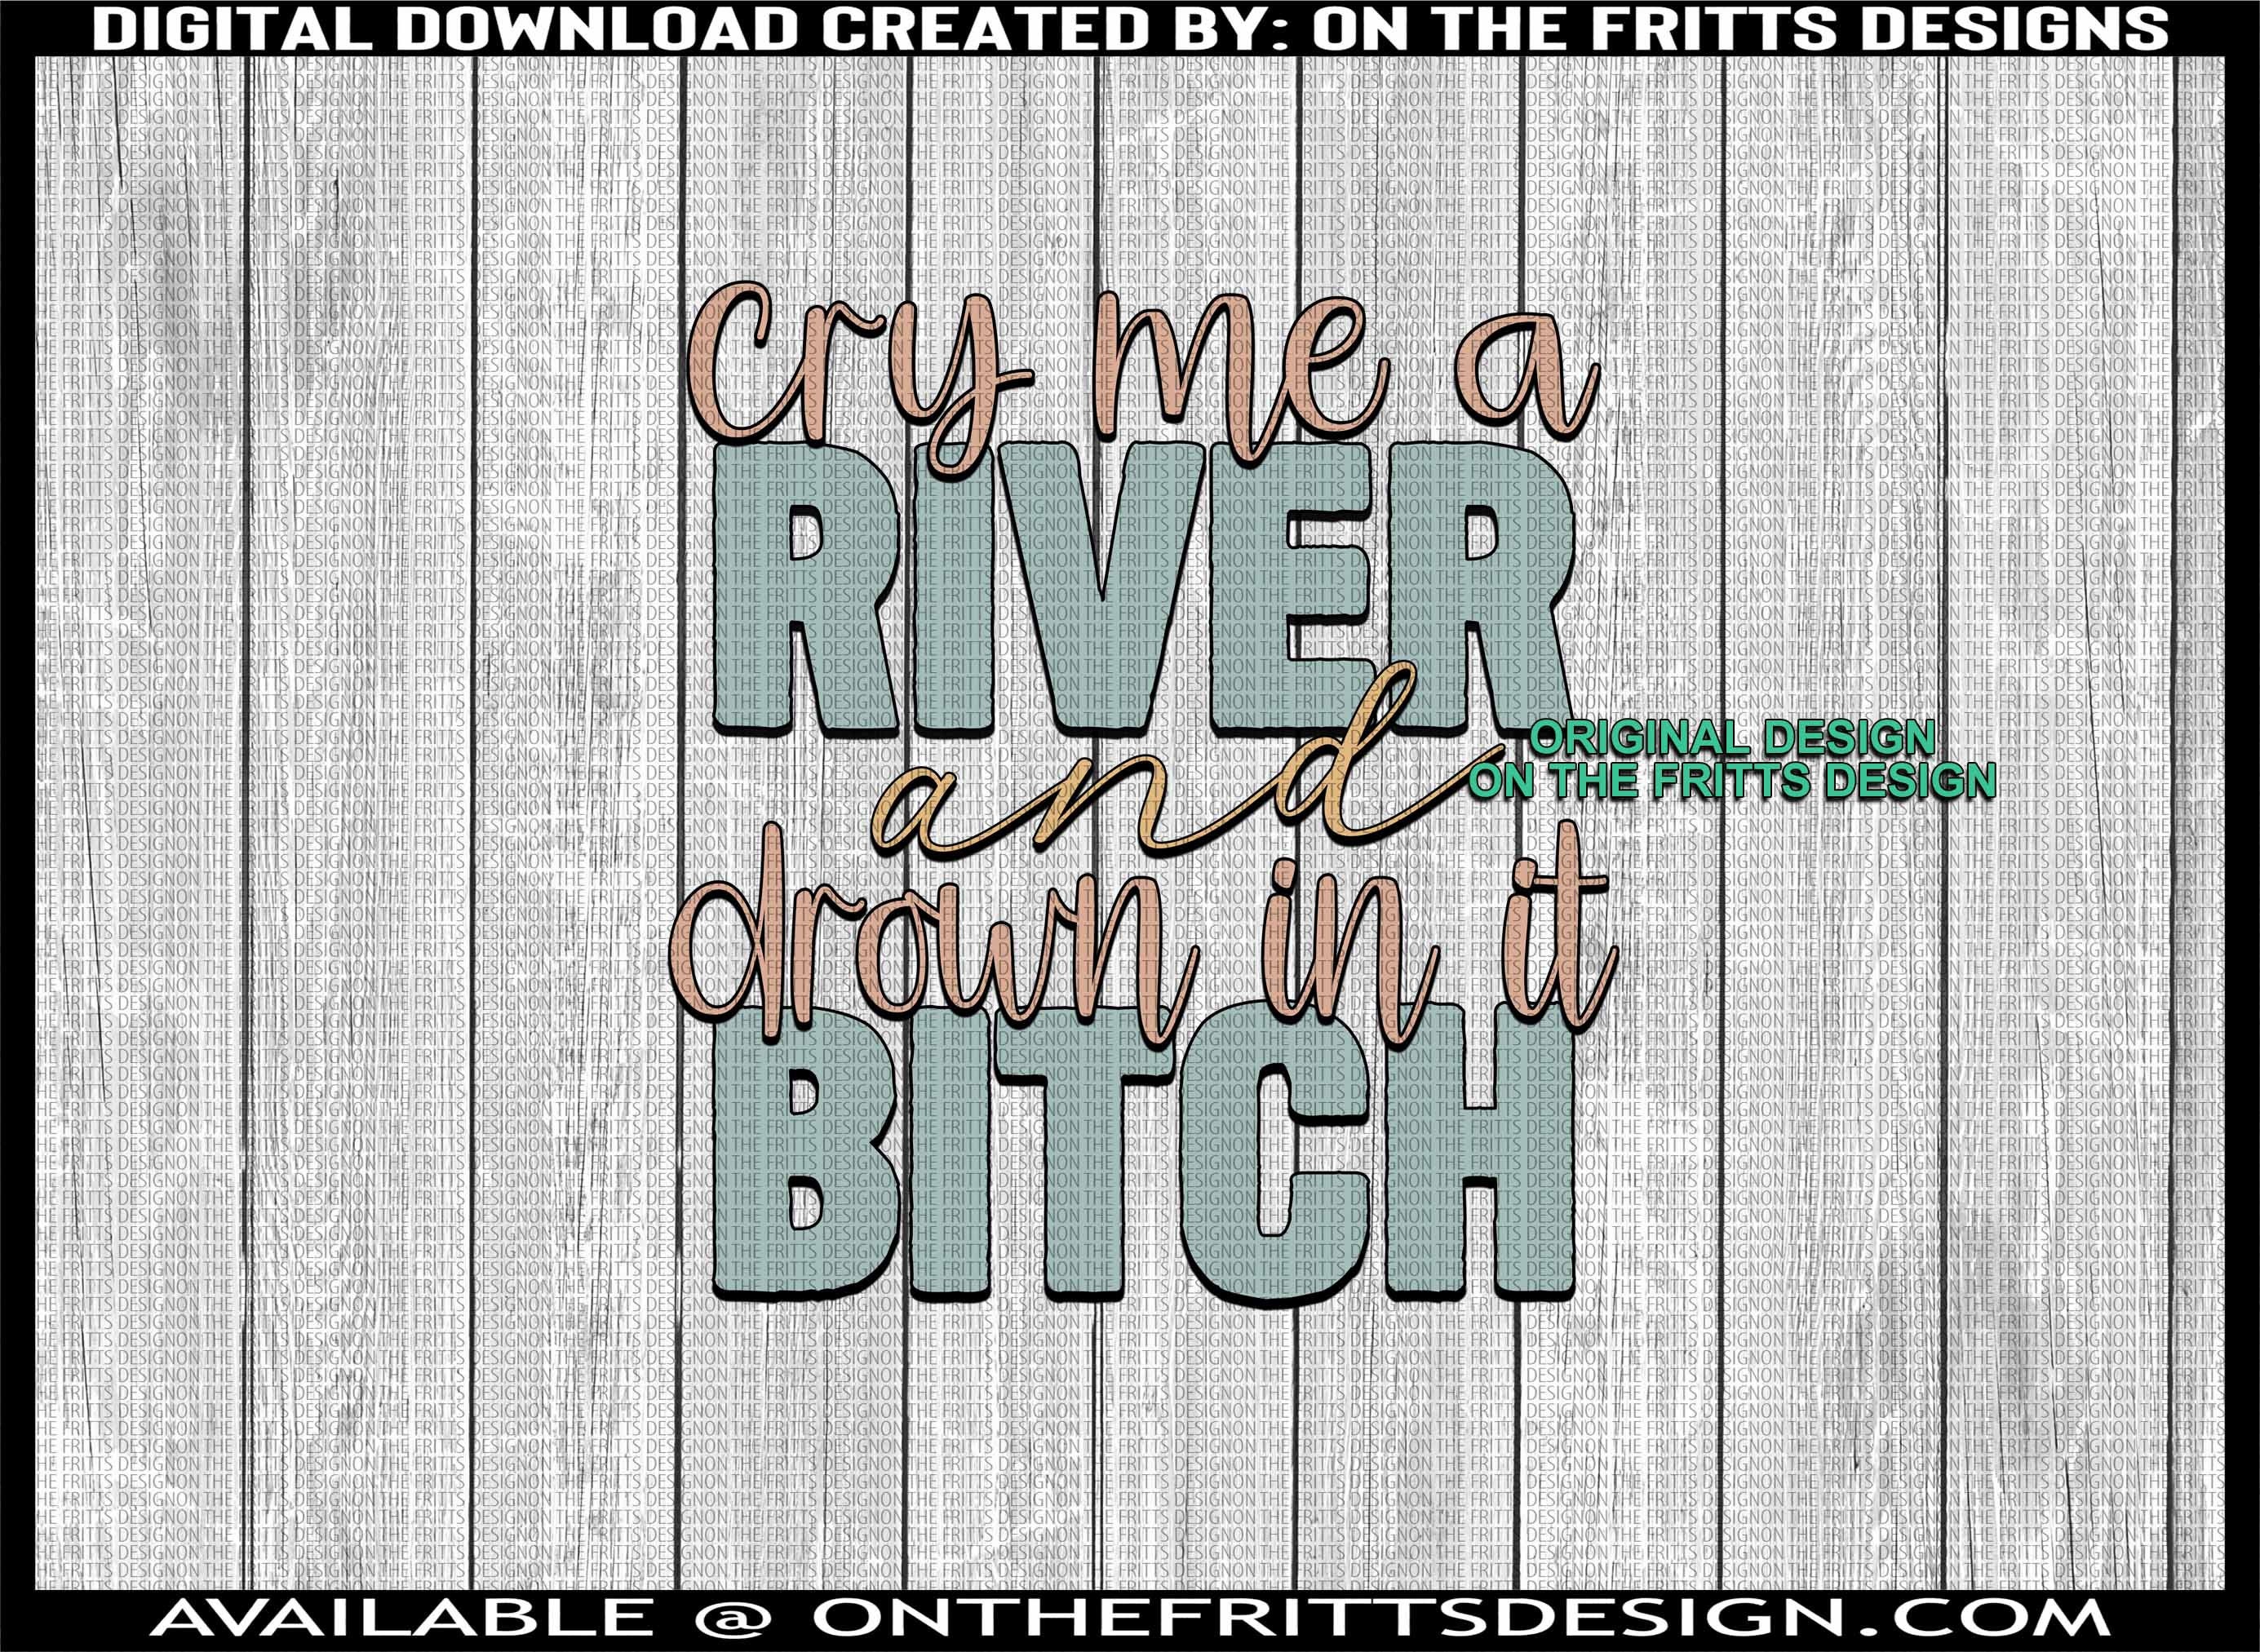 Justin Timberlake Quote: “Cry me a river, build a bridge, and get over it.”